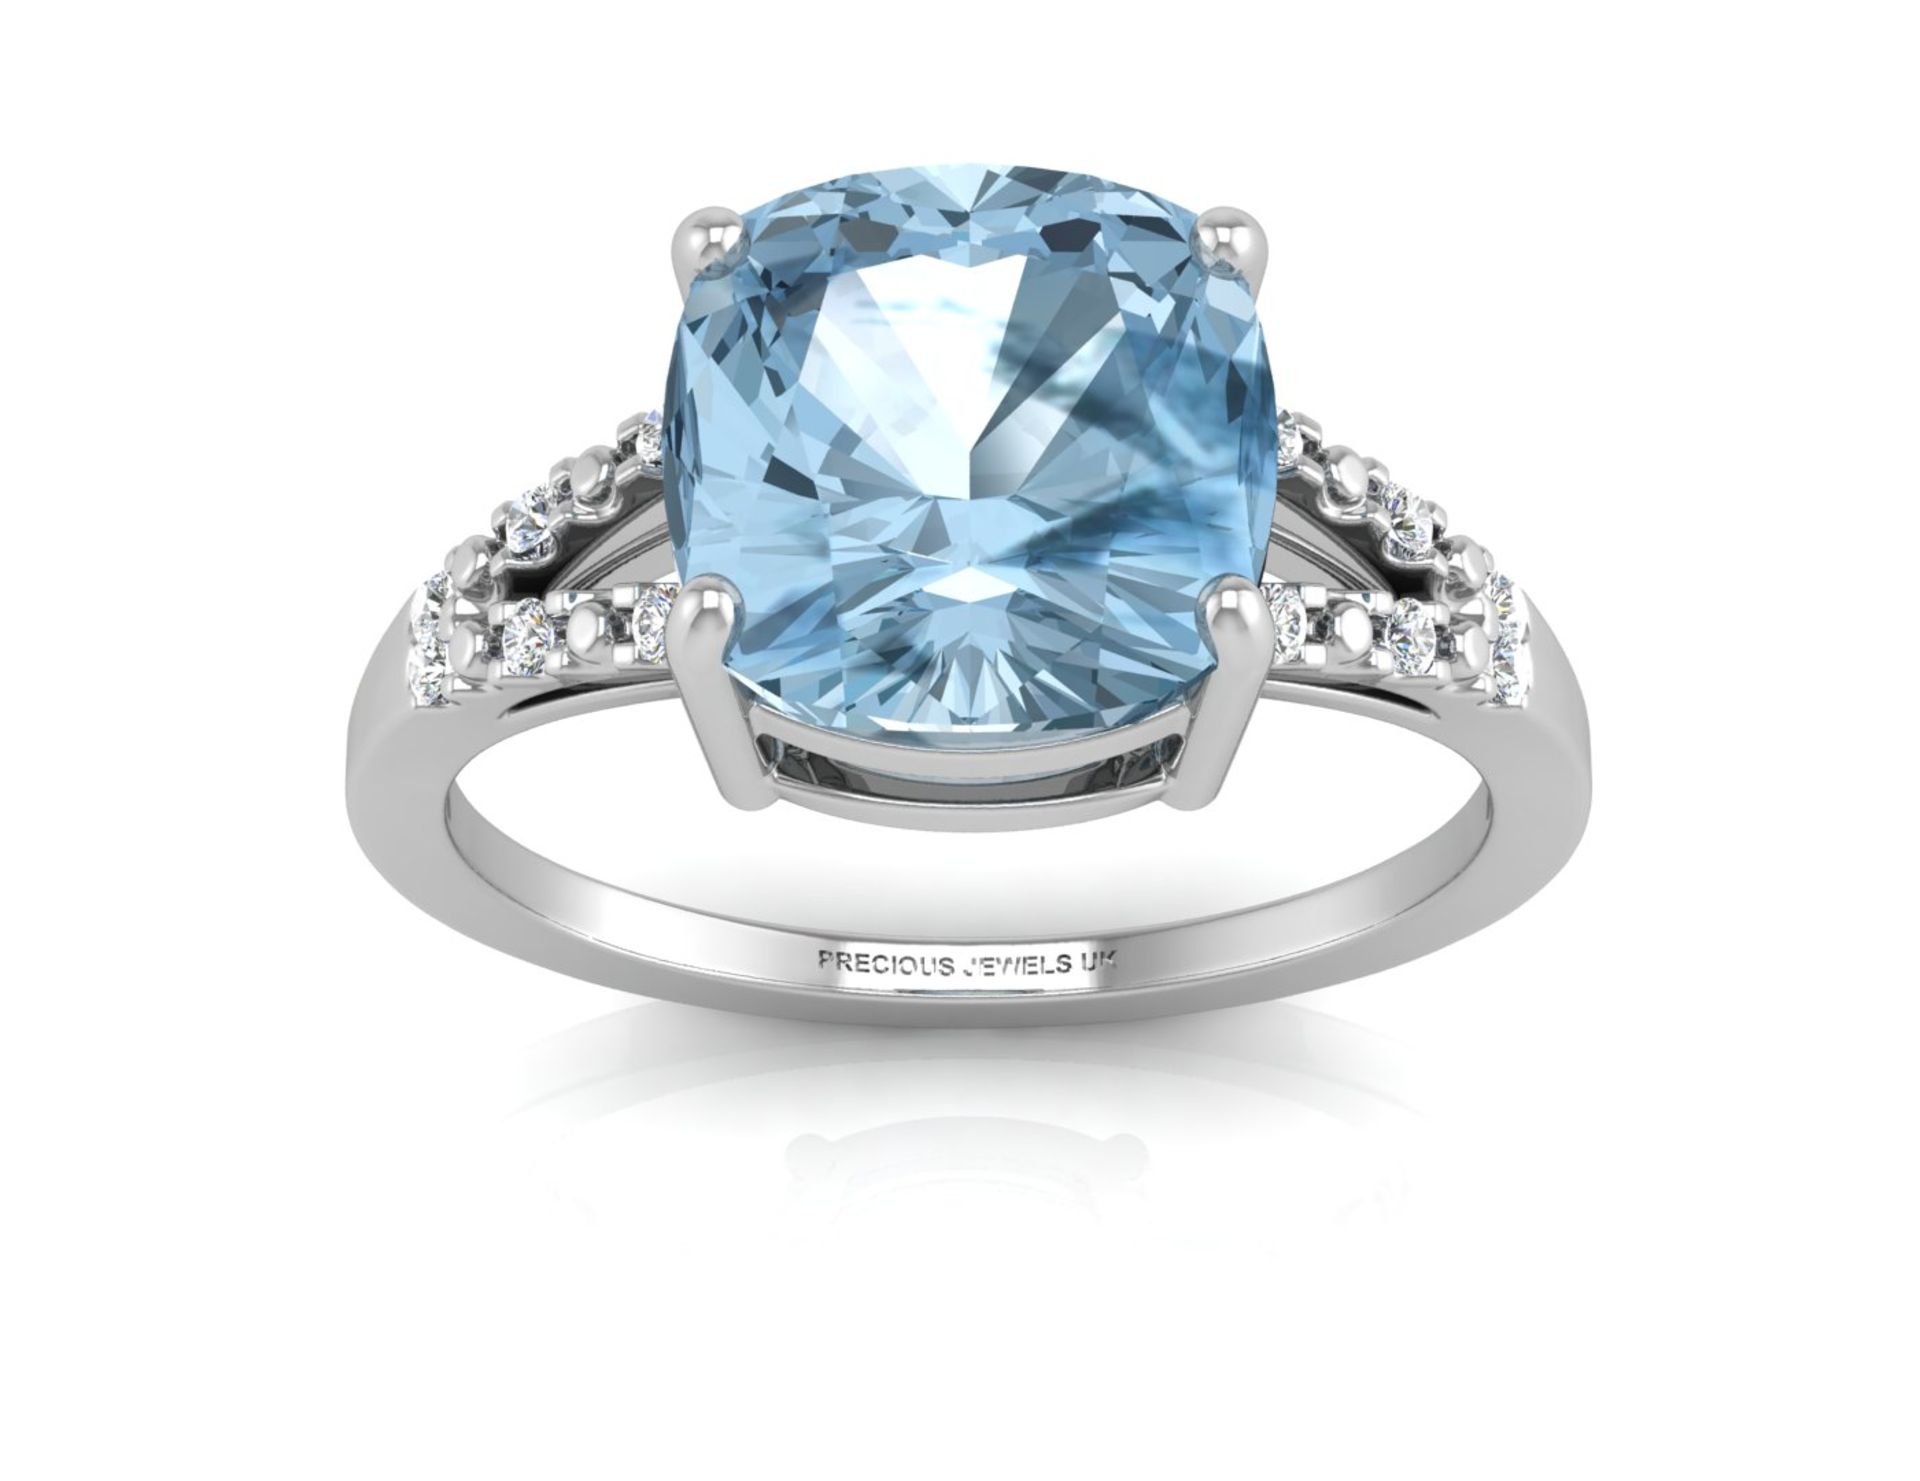 UNUSED - Certified by GIE 9ct White Gold Cushion Cut Blue Topaz With Diamond Set Shoulders Ring 0.06 - Image 3 of 5